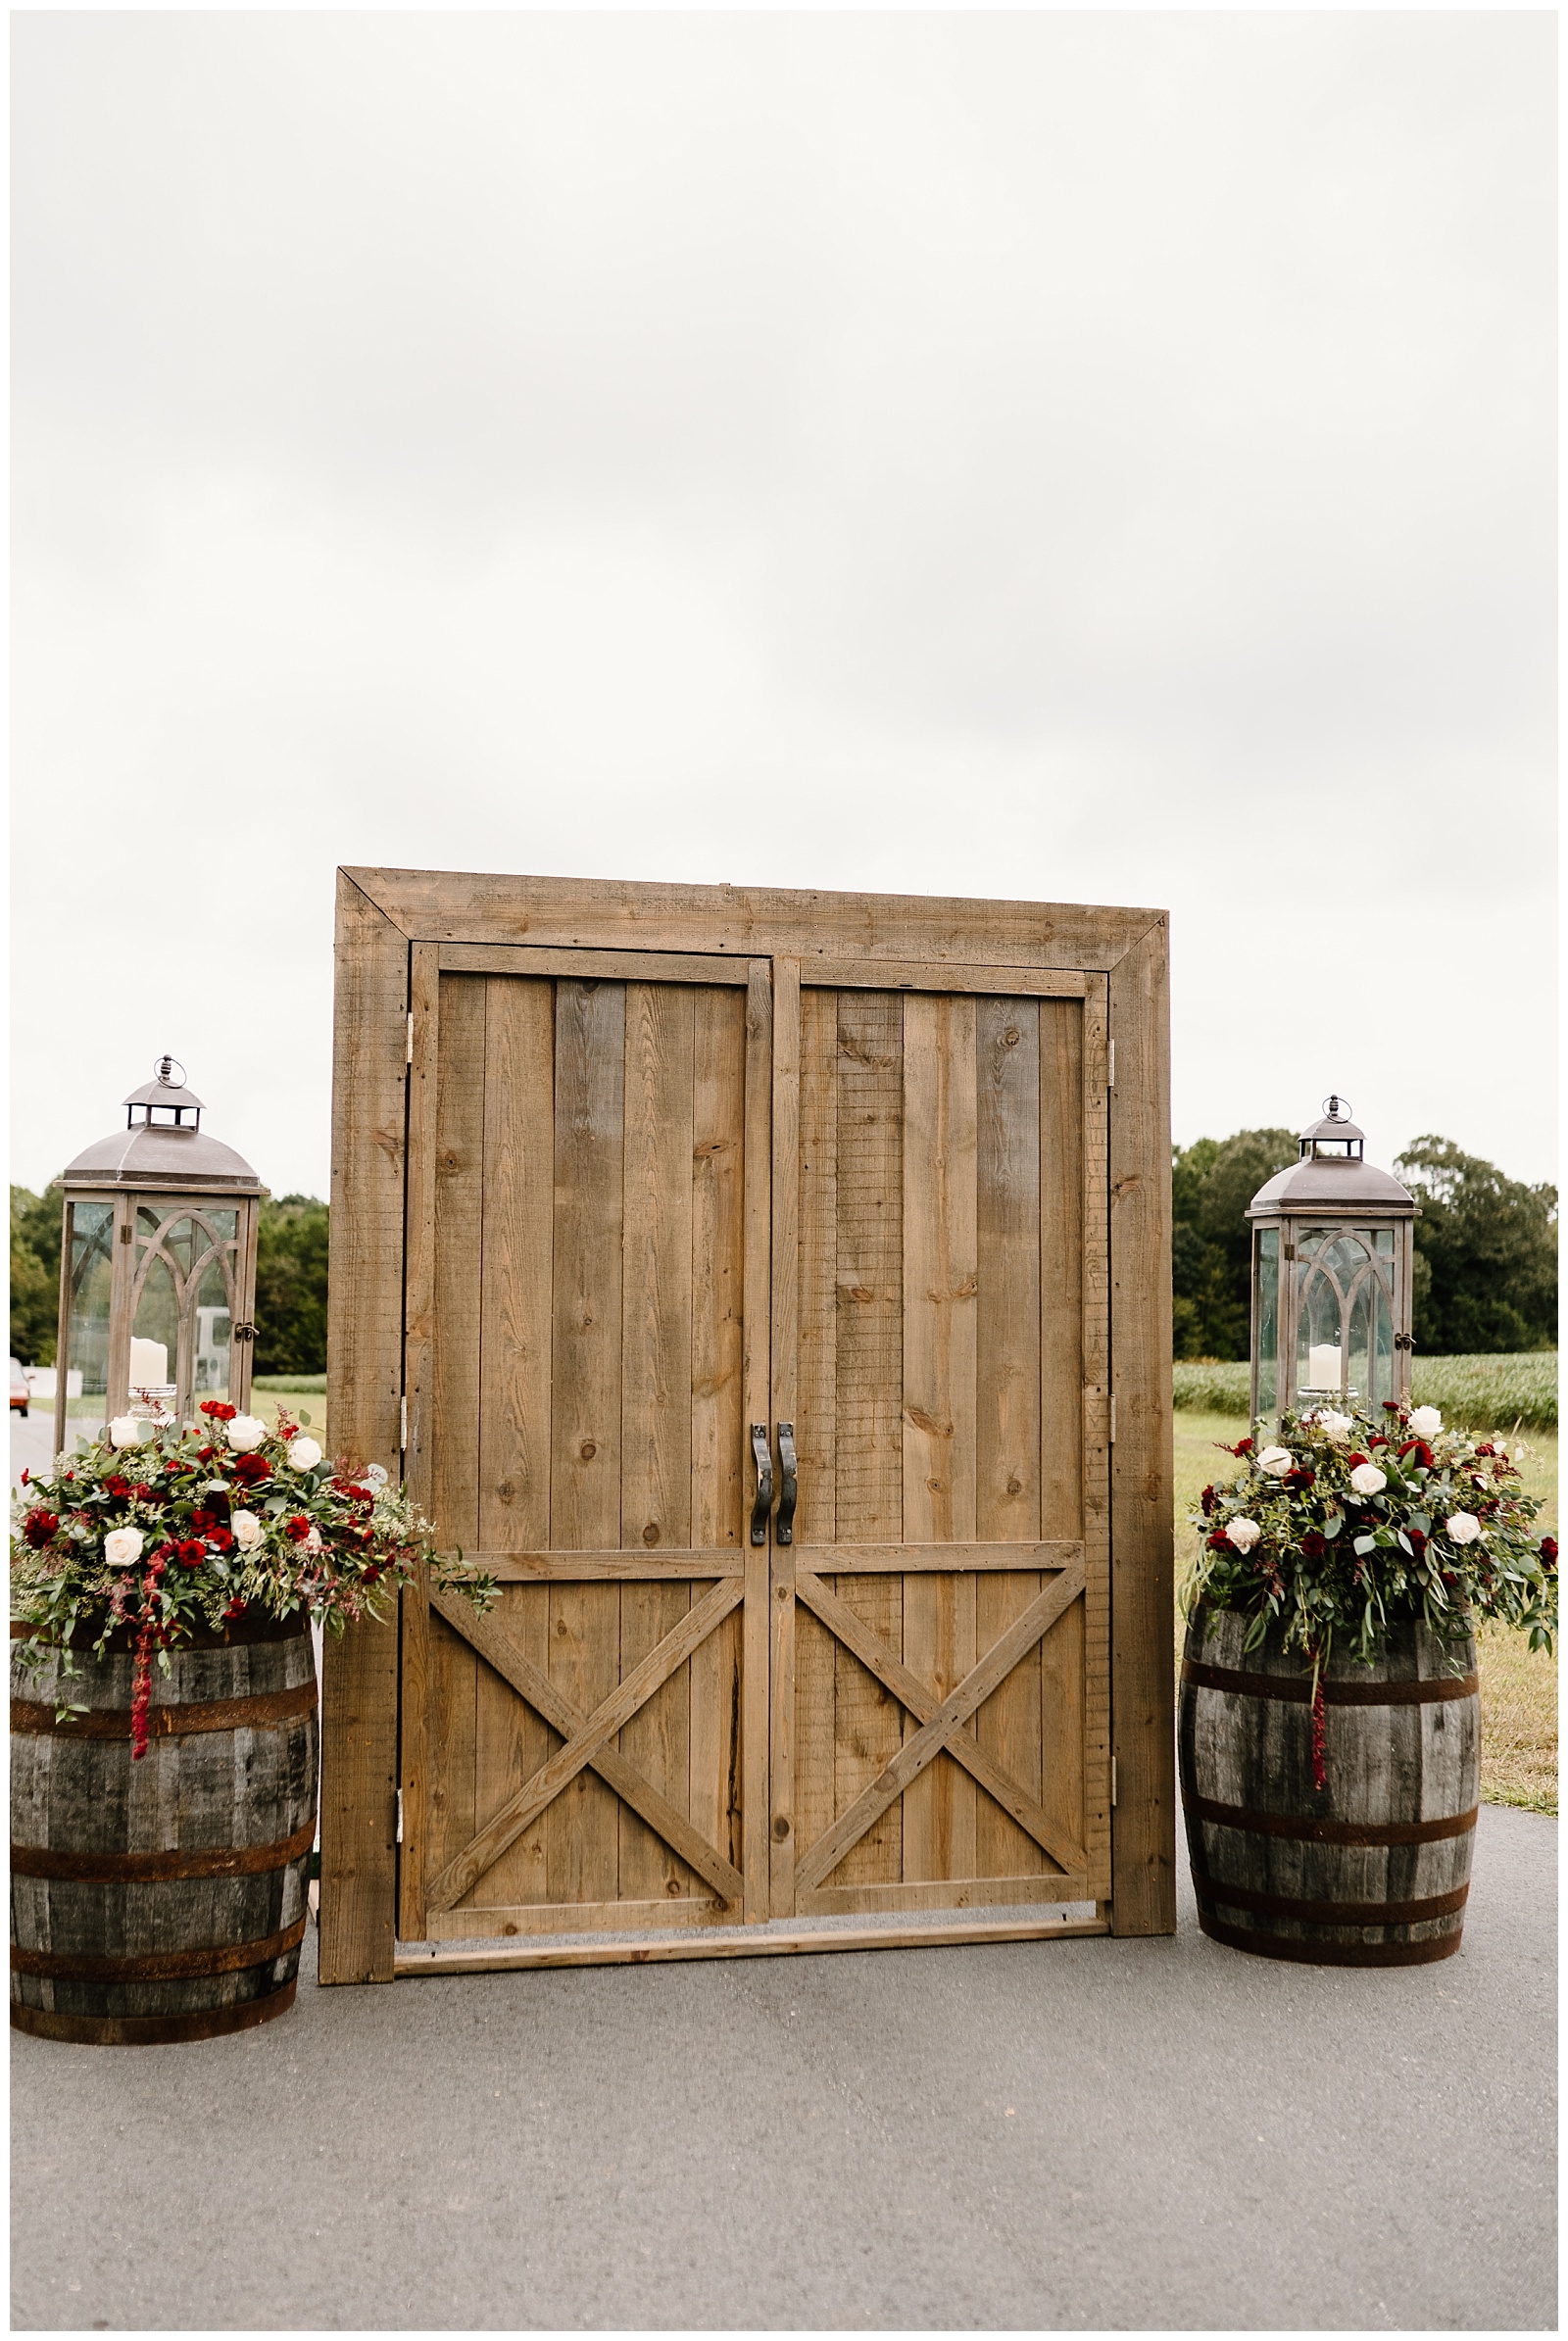 Barn door style entrance arch for the wedding aisle Rustic barrel wedding decoration with large bouquet of greenery, dark bordeaux mums, and dusty pink roses.